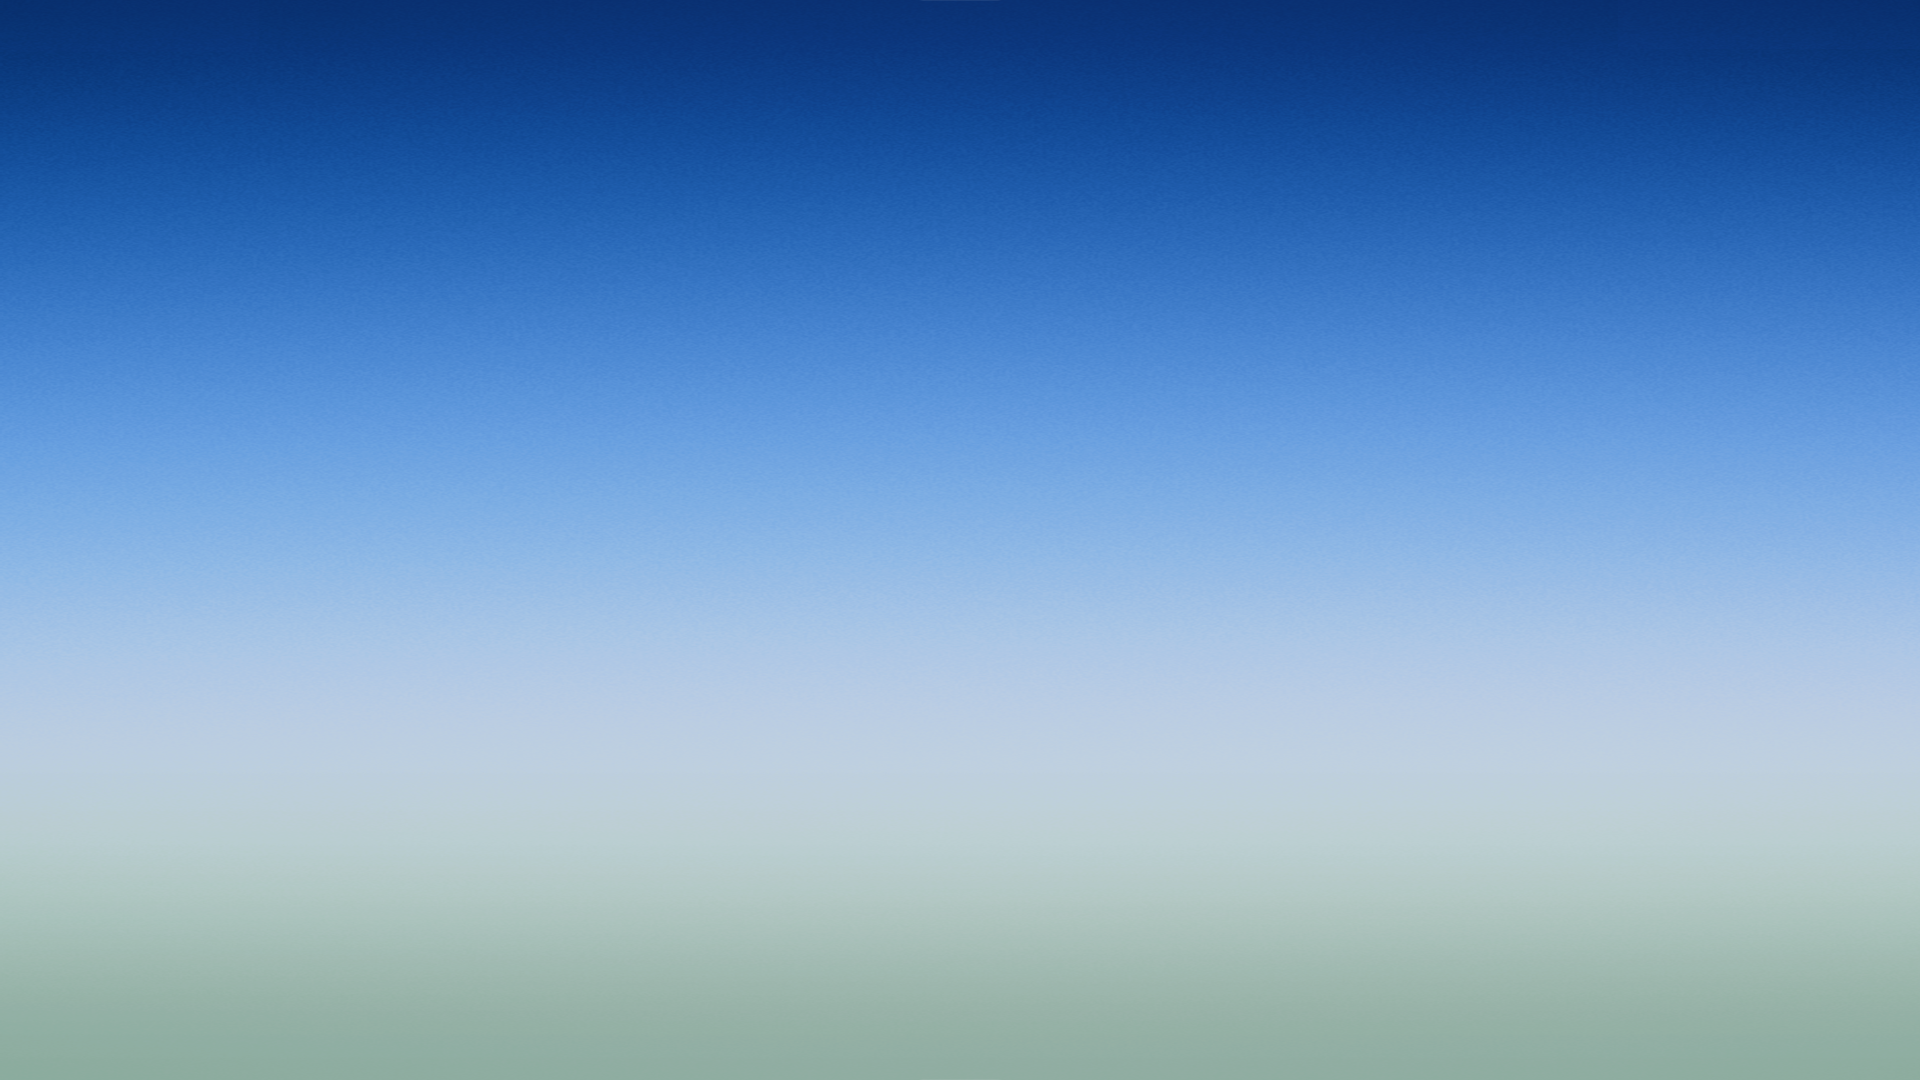 Download iOS 7 Wallpaper for Mac 1920 1080 resolution